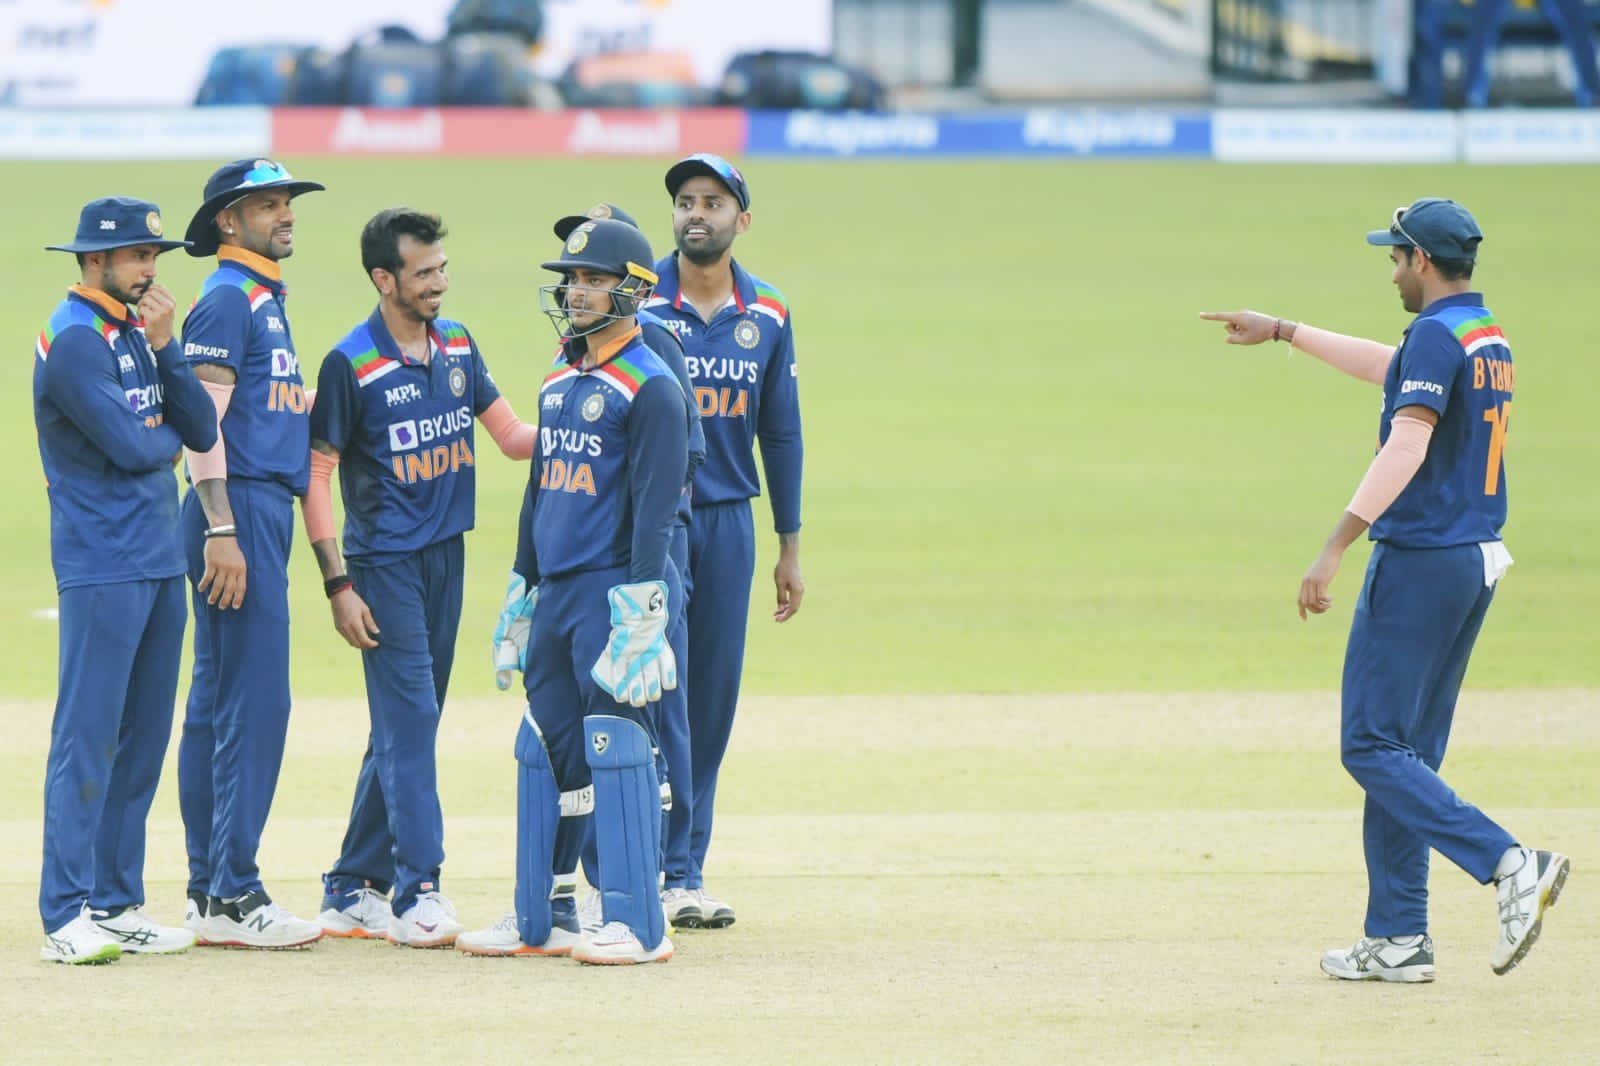 SL vs IND | 1st T20I: Today I Learnt - Samson fails to deliver, Chahal roars back and Chameera's X-factor